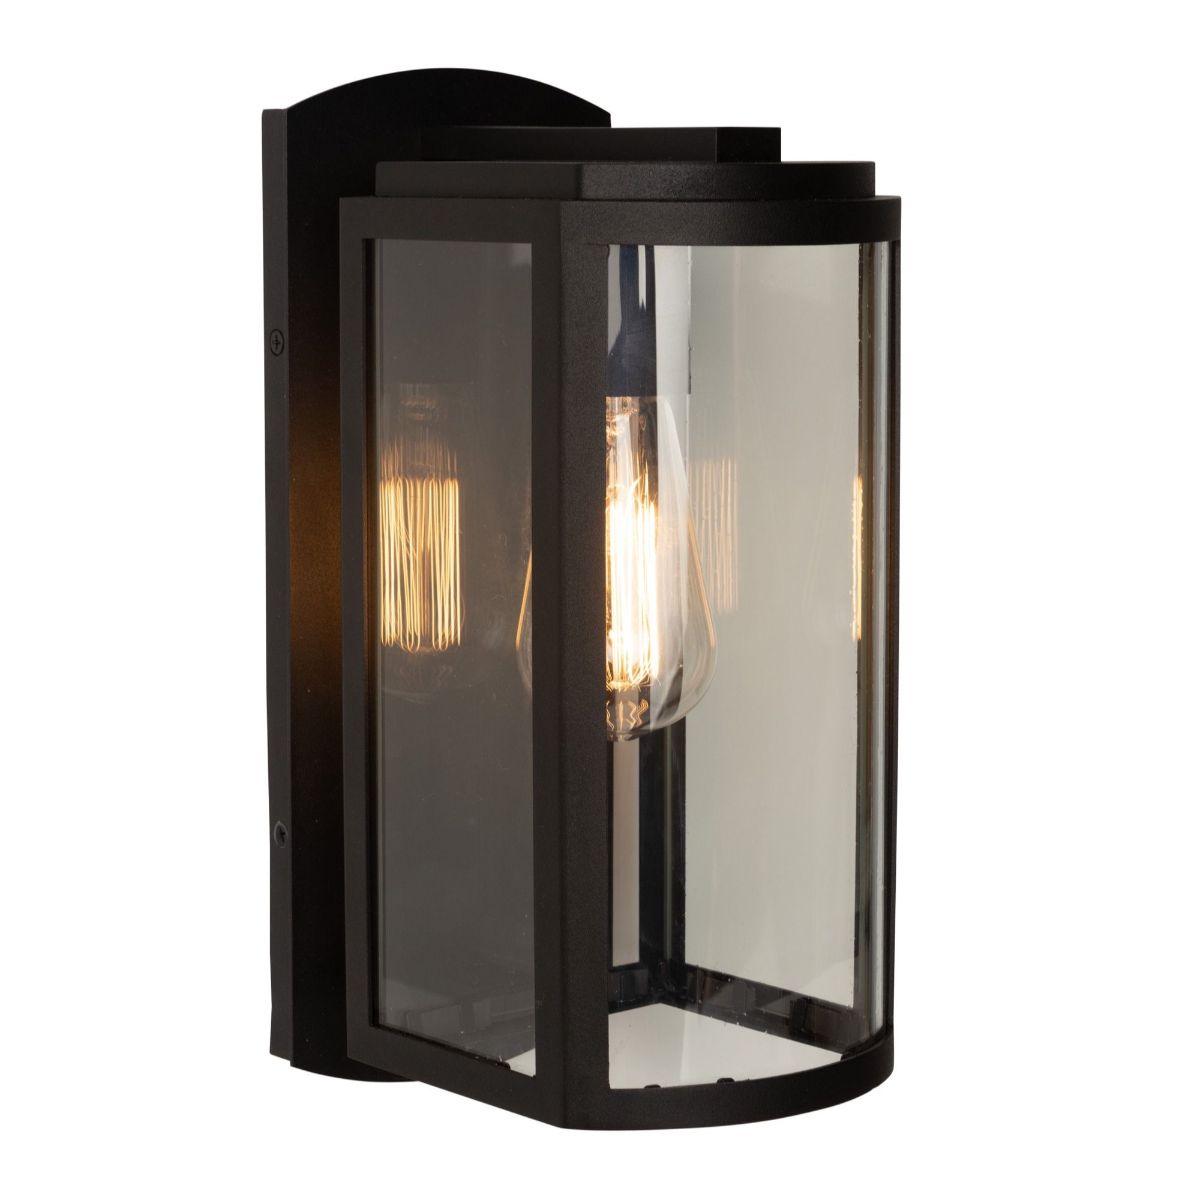 Lakewood 13 In. Outdoor Wall Light Matte Black Finish - Bees Lighting